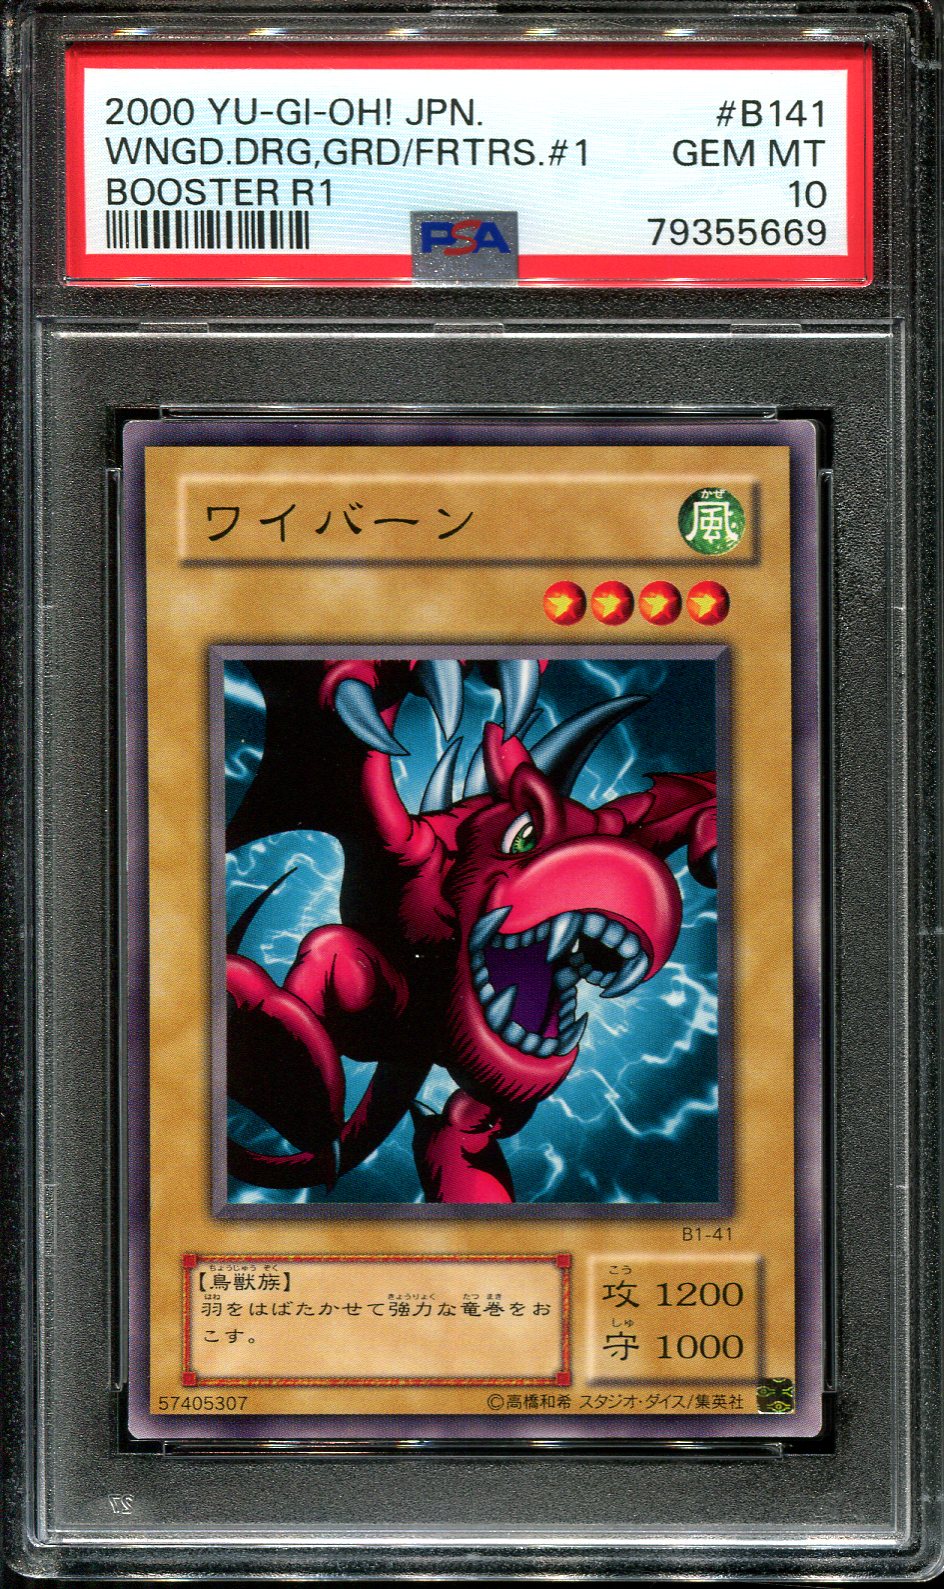 YUGIOH - PSA 10 - WINGED DRAGON GUARDIAN OF THE FORETRESS #1 - B1-41 - BOOSTER R1 - JAPANESE OCG